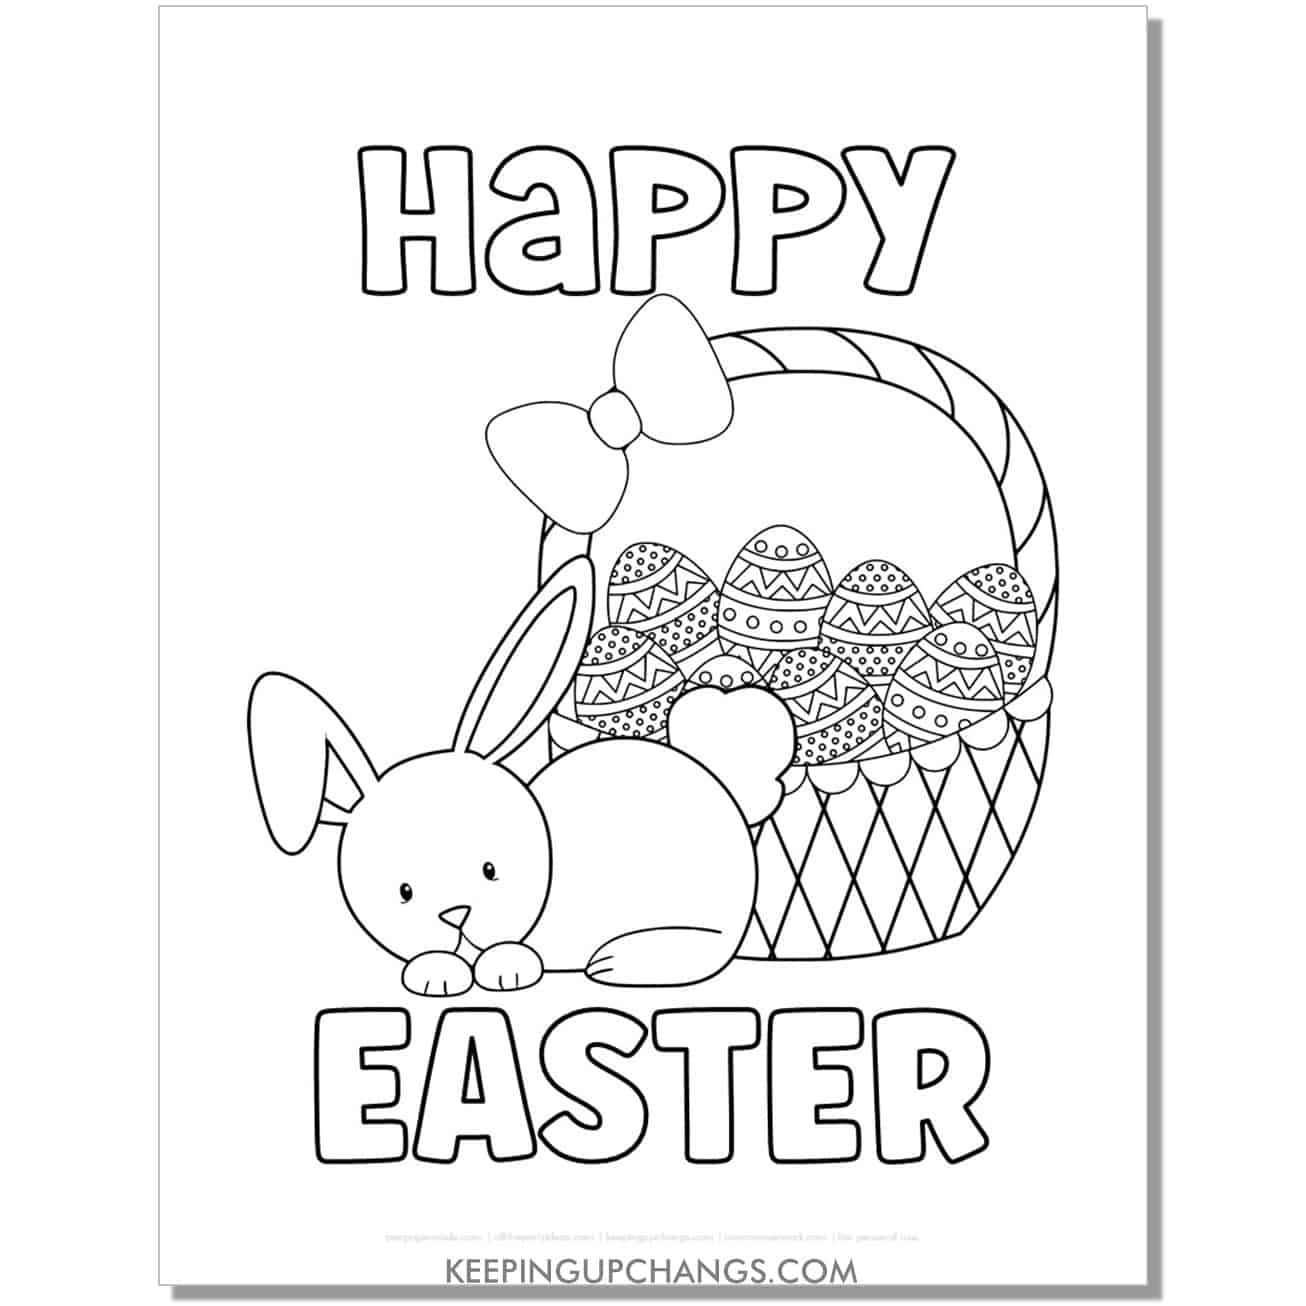 happy easter bunny with basket of eggs coloring page, sheet.